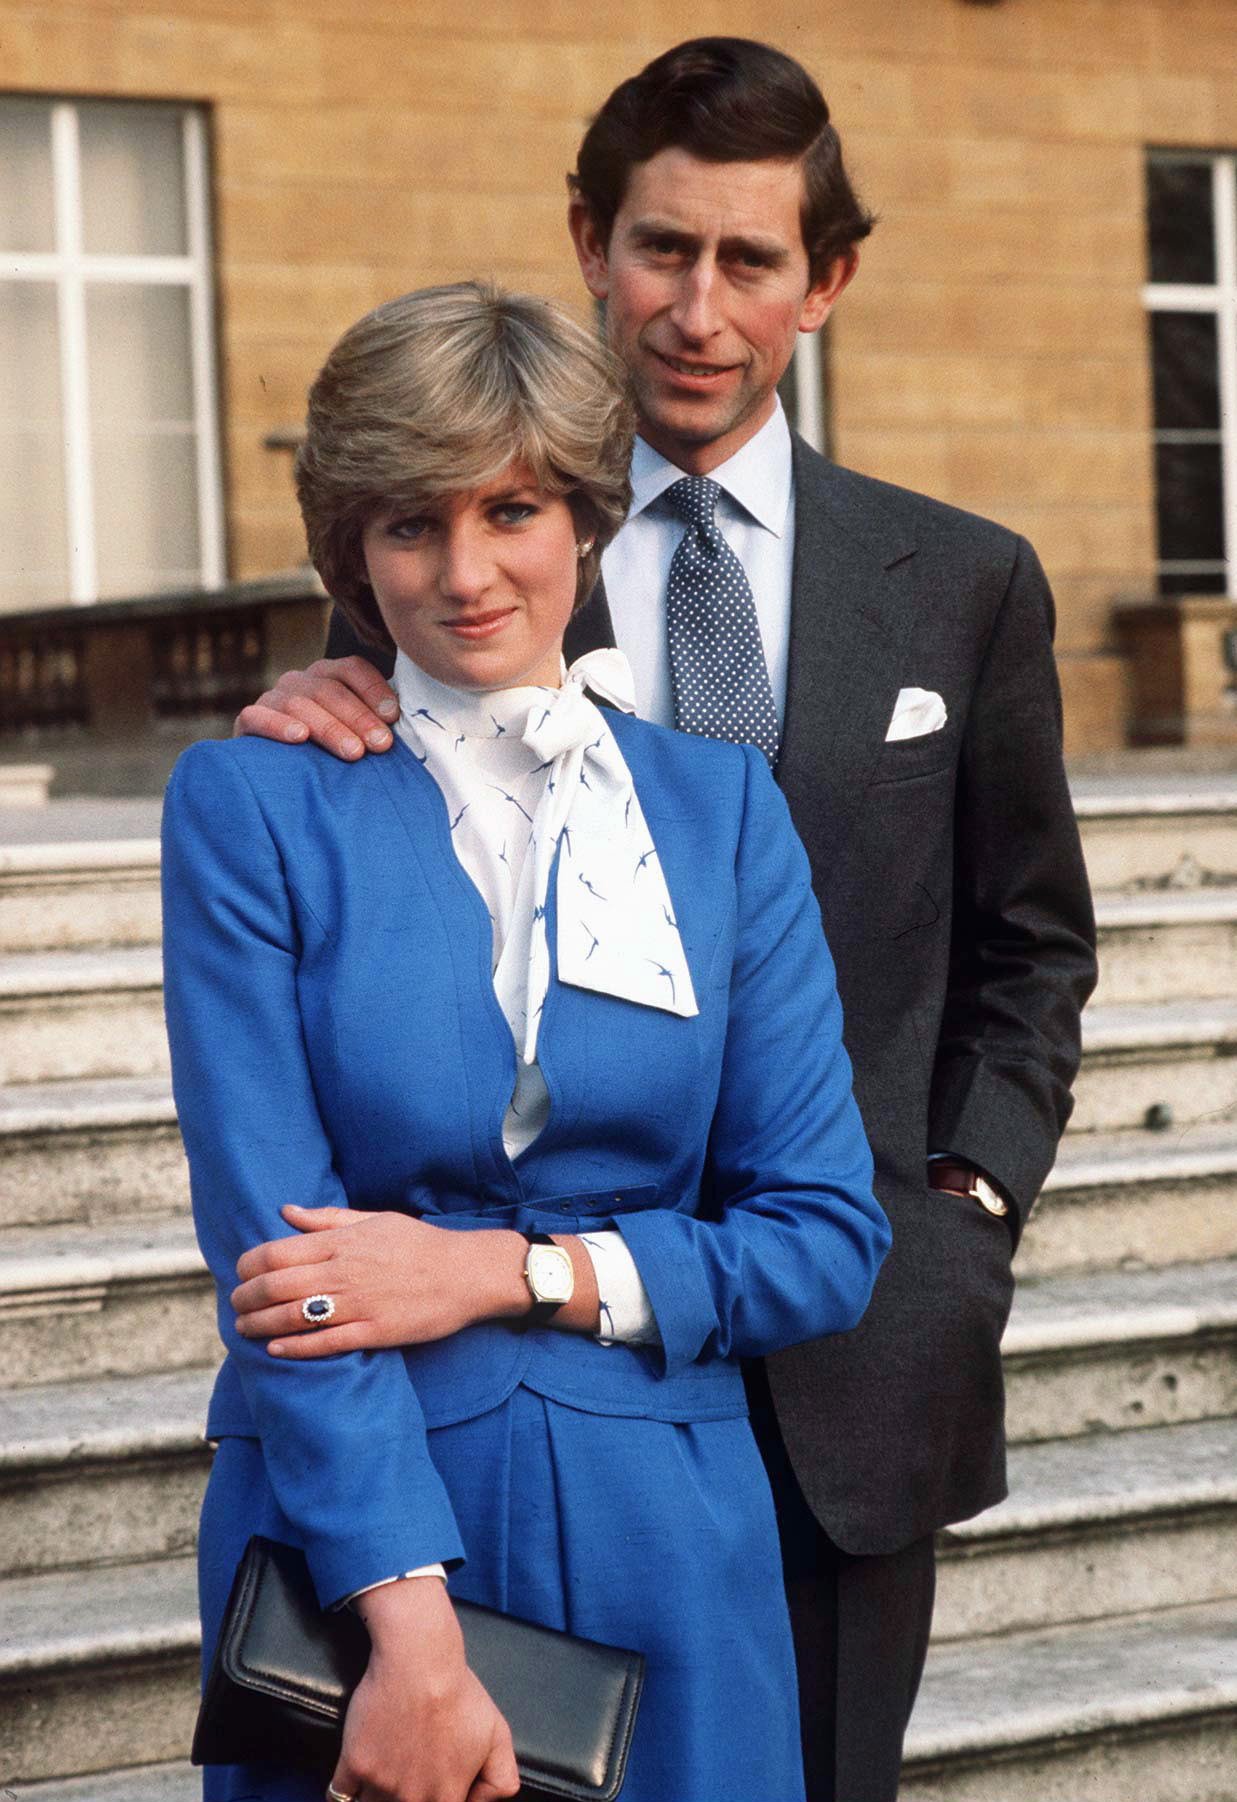 Princess Diana and Prince Charles in London after announcing their in engagement 198`1. | Source: Getty Images